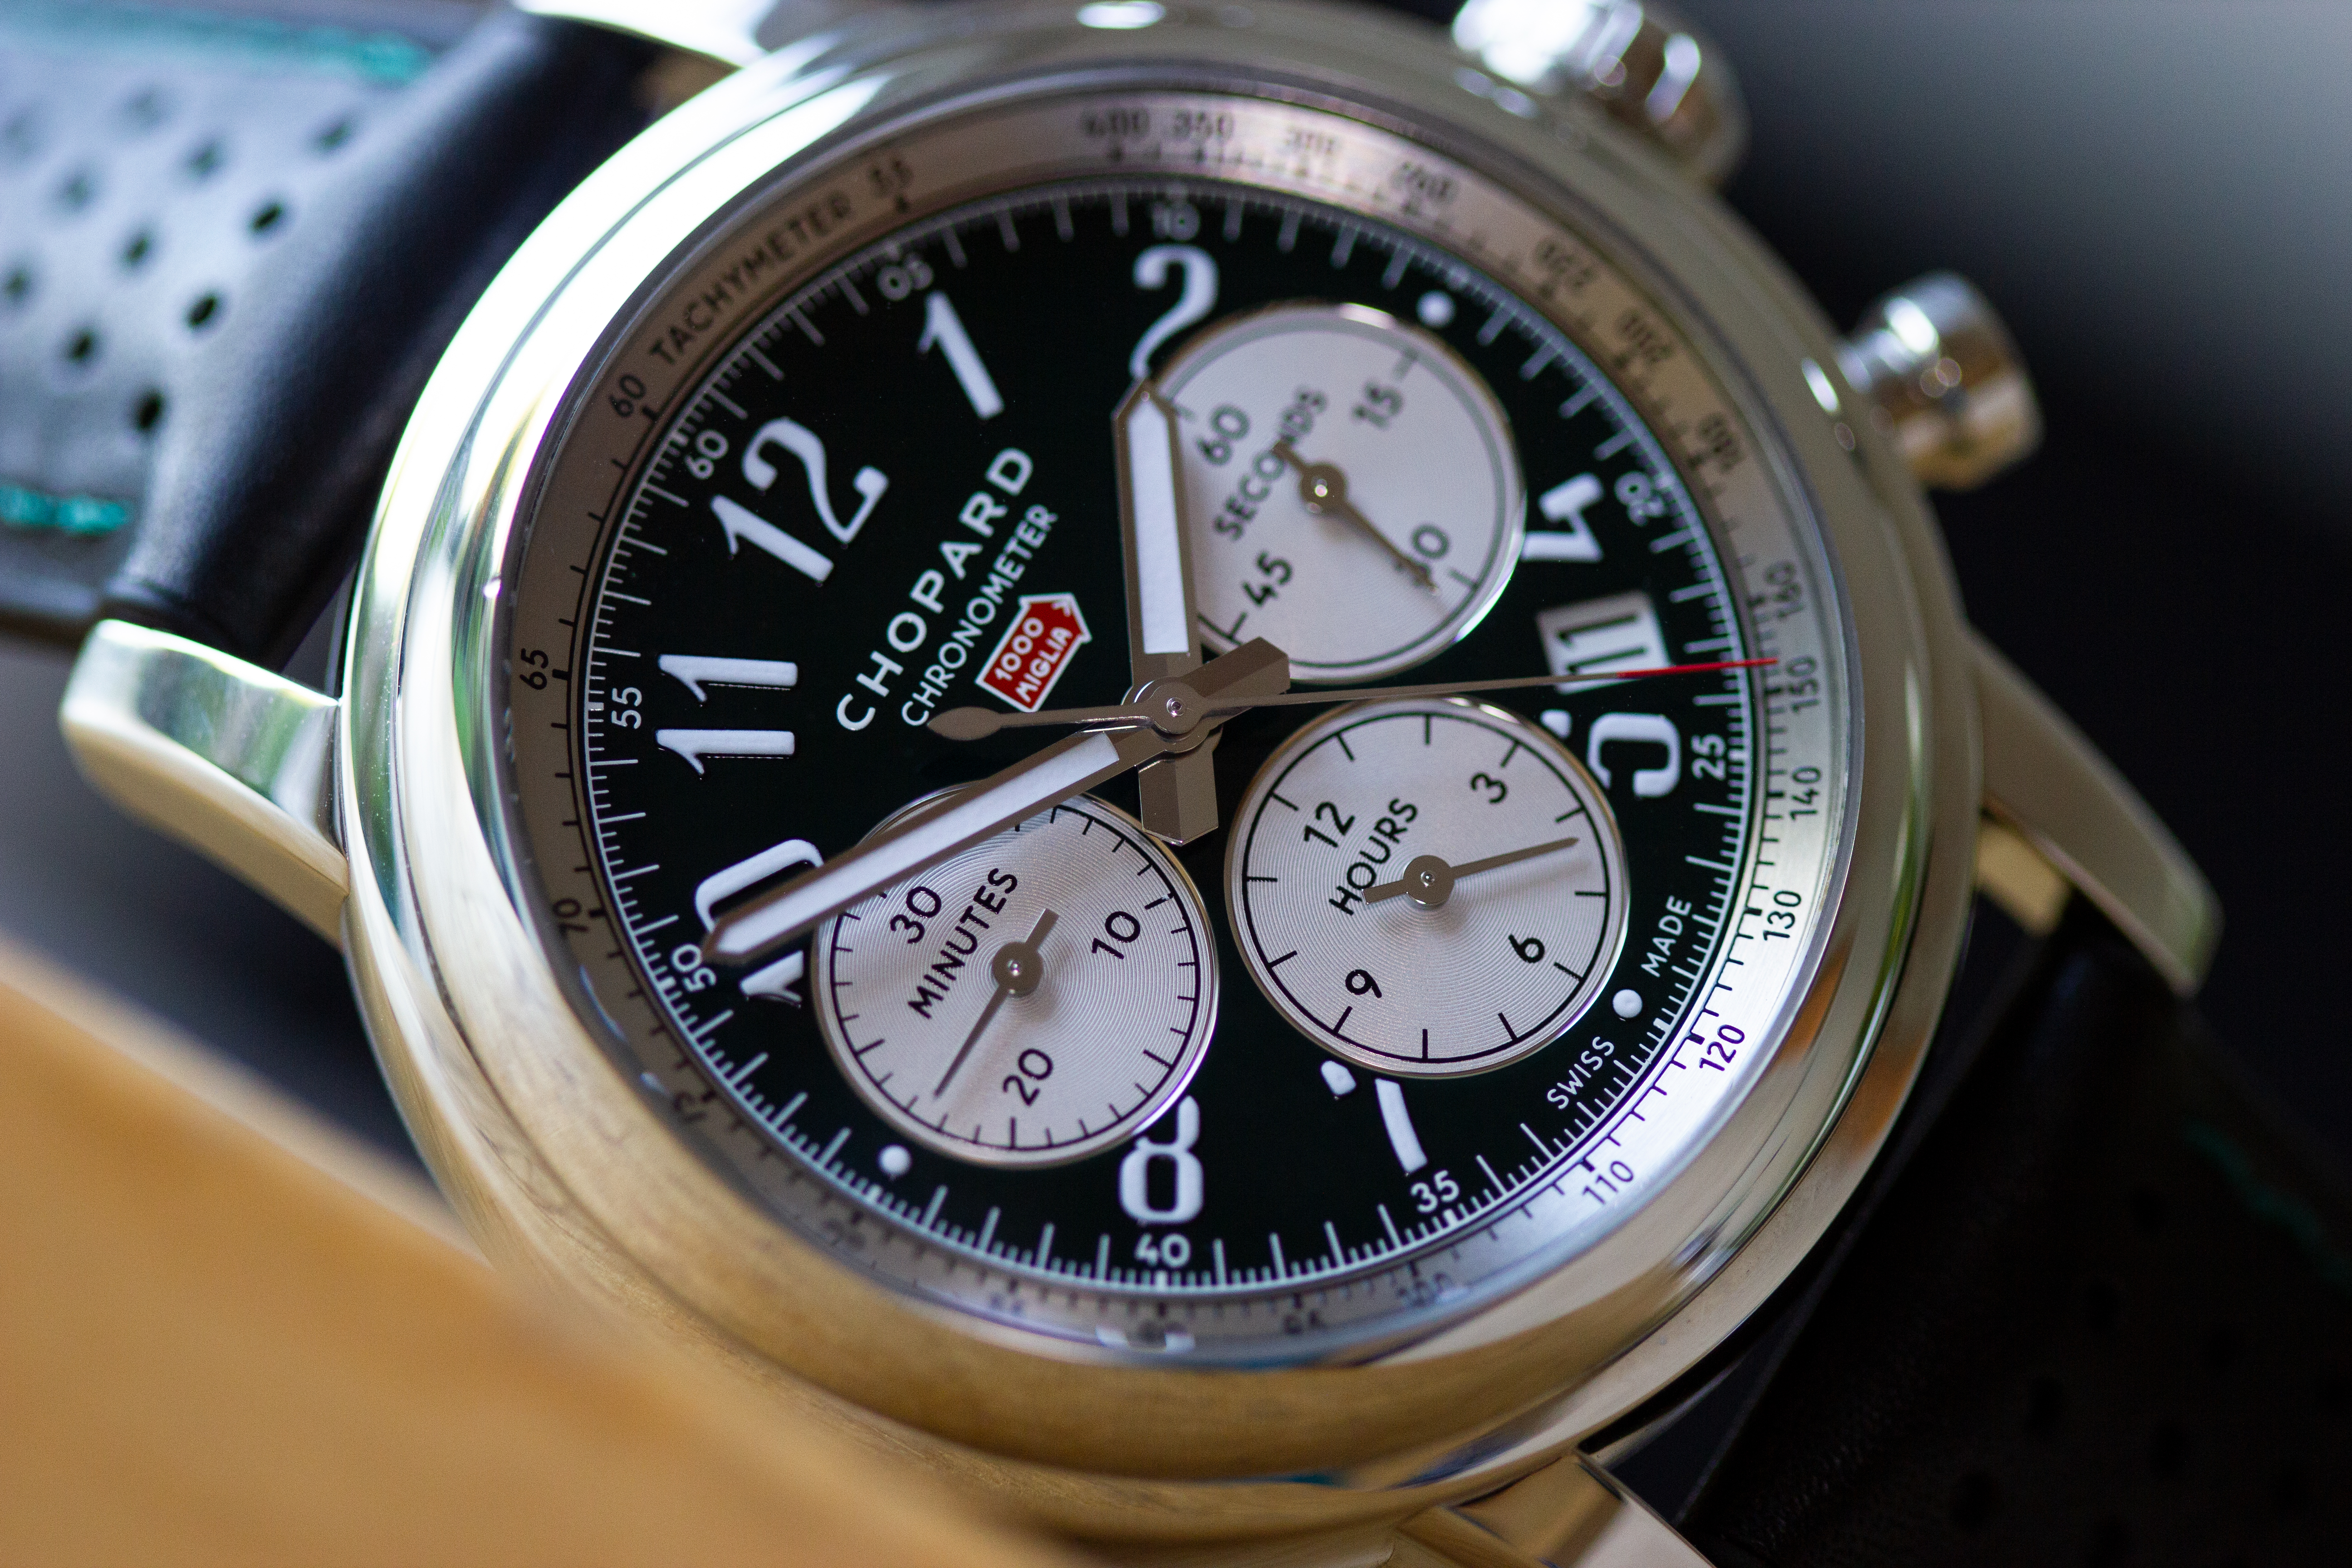 Personal Review: Chopard Mille Miglia 42mm Race Edition 2018